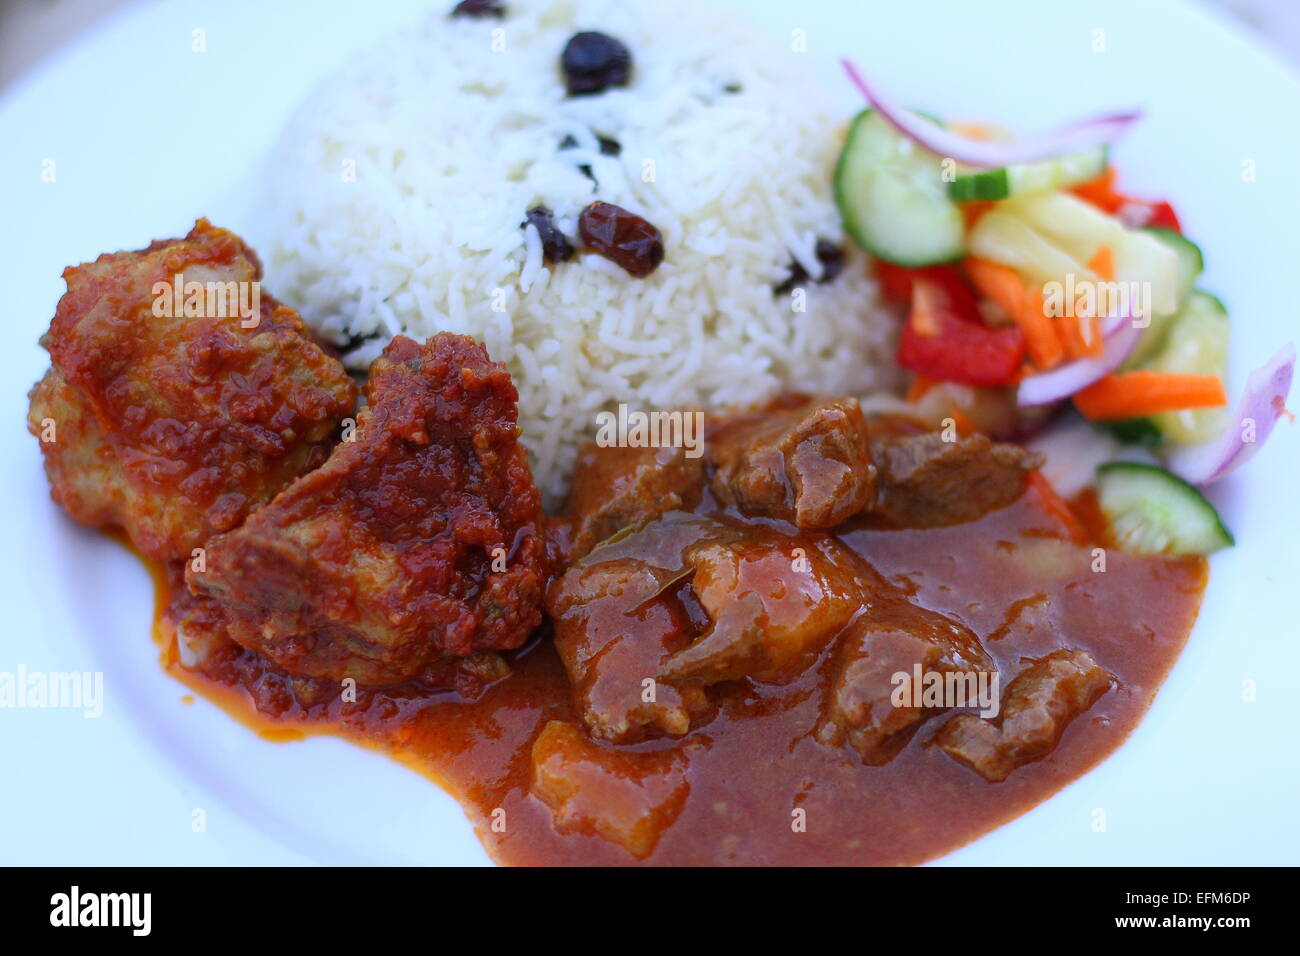 Malaysian cuisine Nasi Minyak (Scented Rice) with Beef Curry, chicken Sambal and cucumber and Pineapple Salad Stock Photo